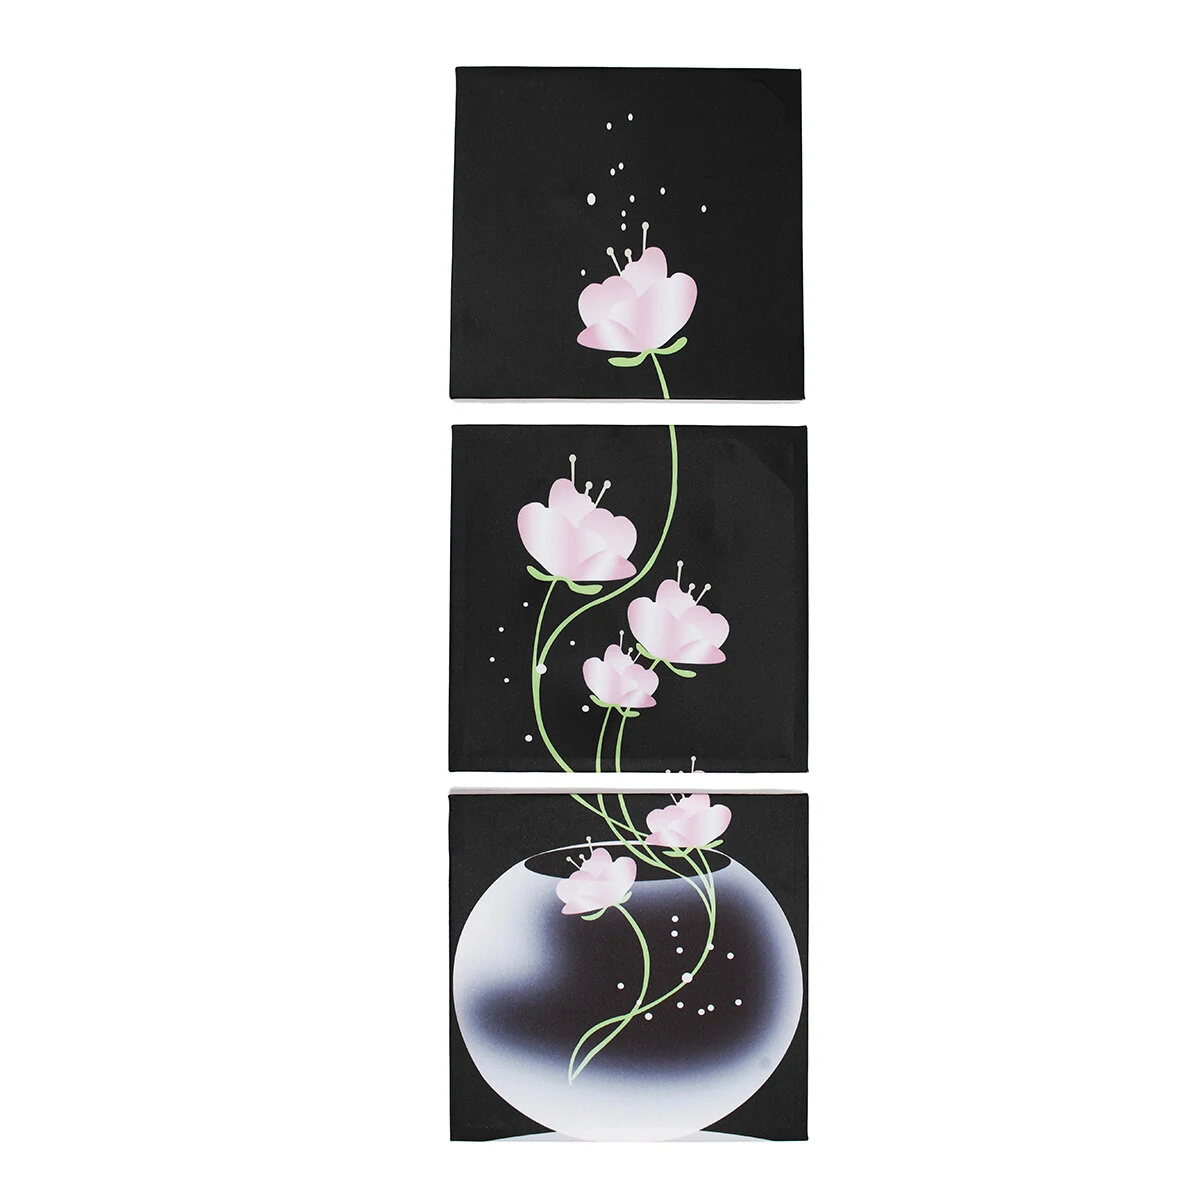 3pcs canvas print paintings flower oil painting wall decor decorative printing art picture frameless/framed home office decoration